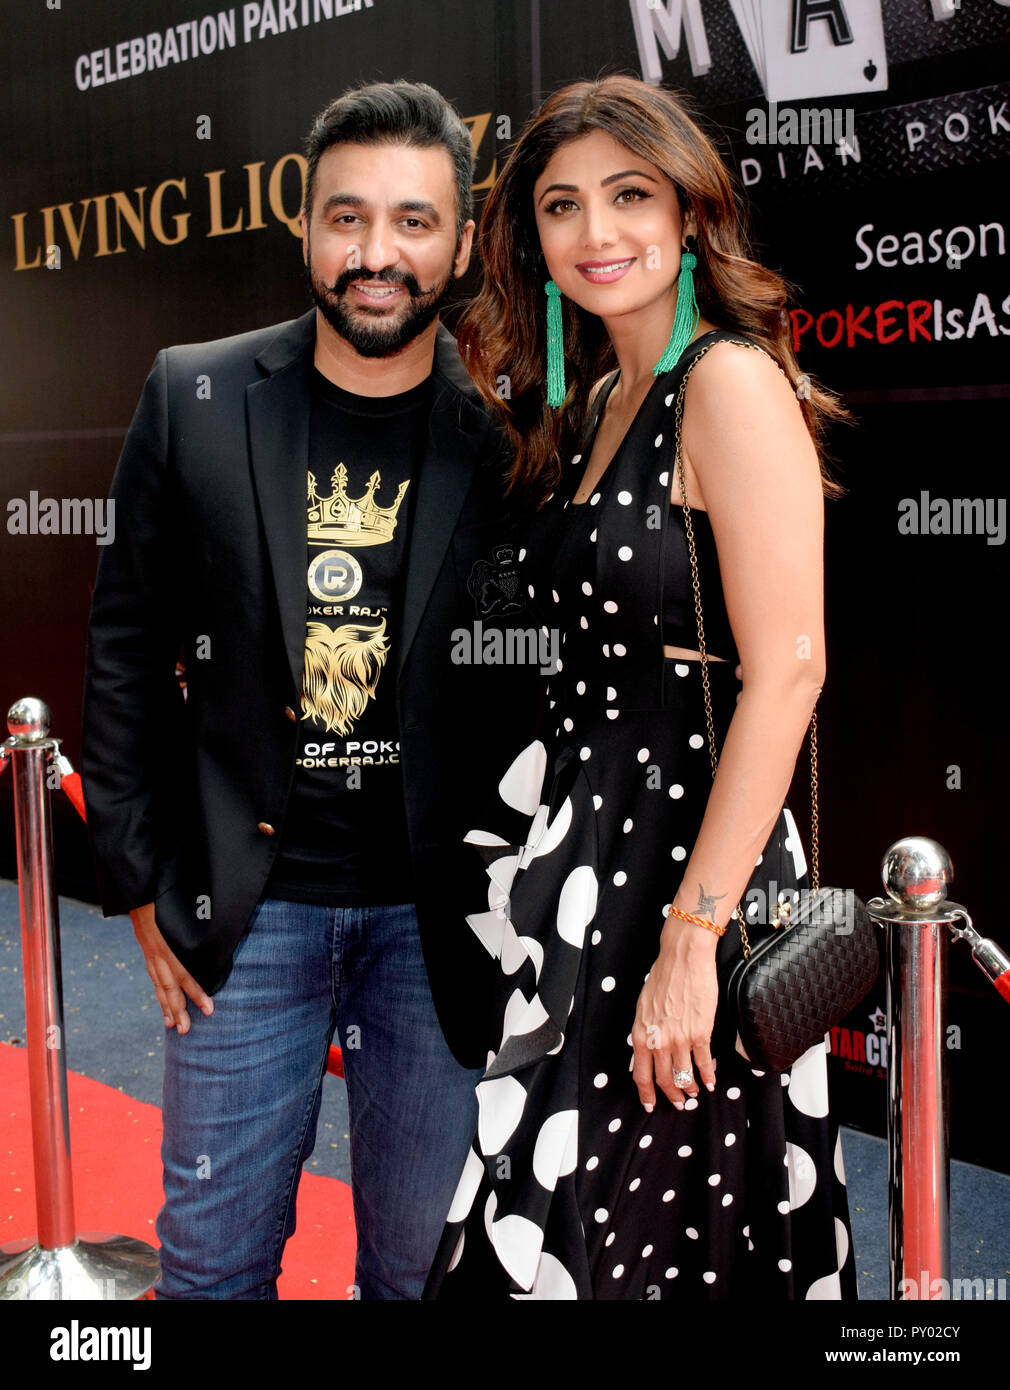 Indian film actress Shilpa Shetty with husband Raj Kundra pose for the photos during the opening ceremony of Indian Poker League season 3 in Mumbai. Stock Photo